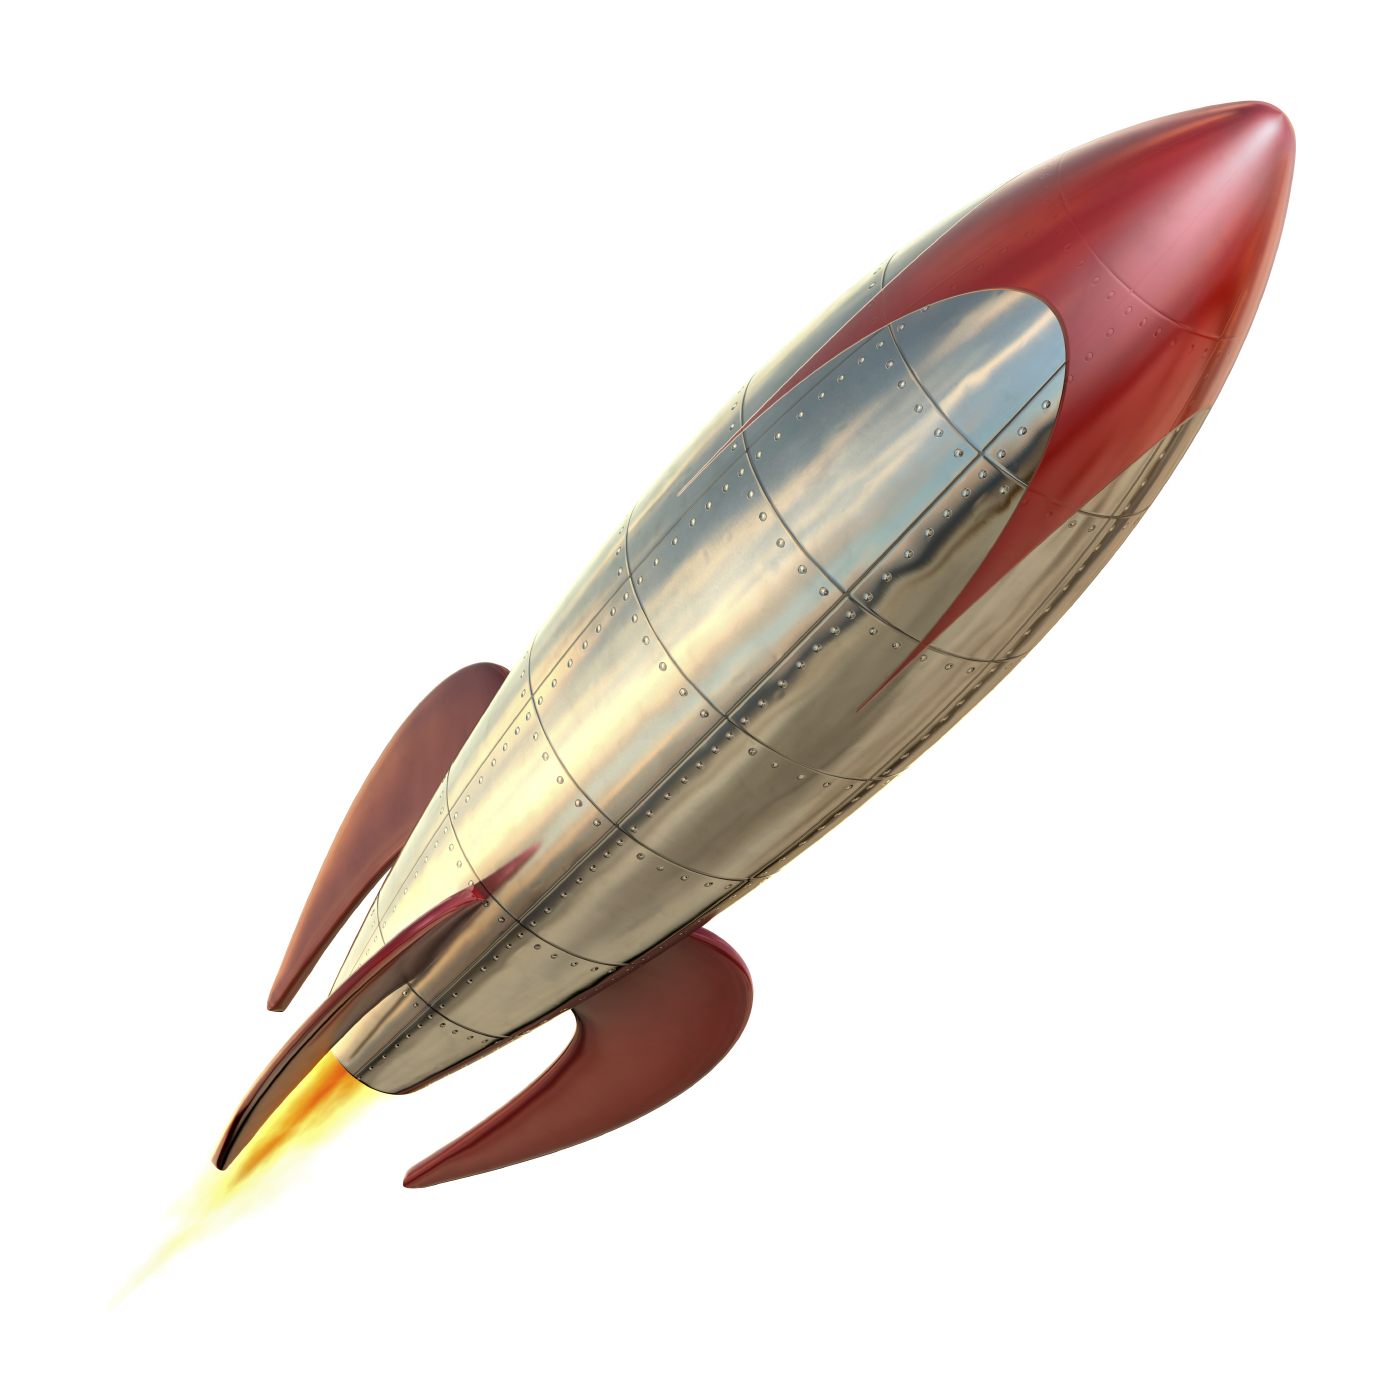 Why an old rocket ship? | Modern Publicity